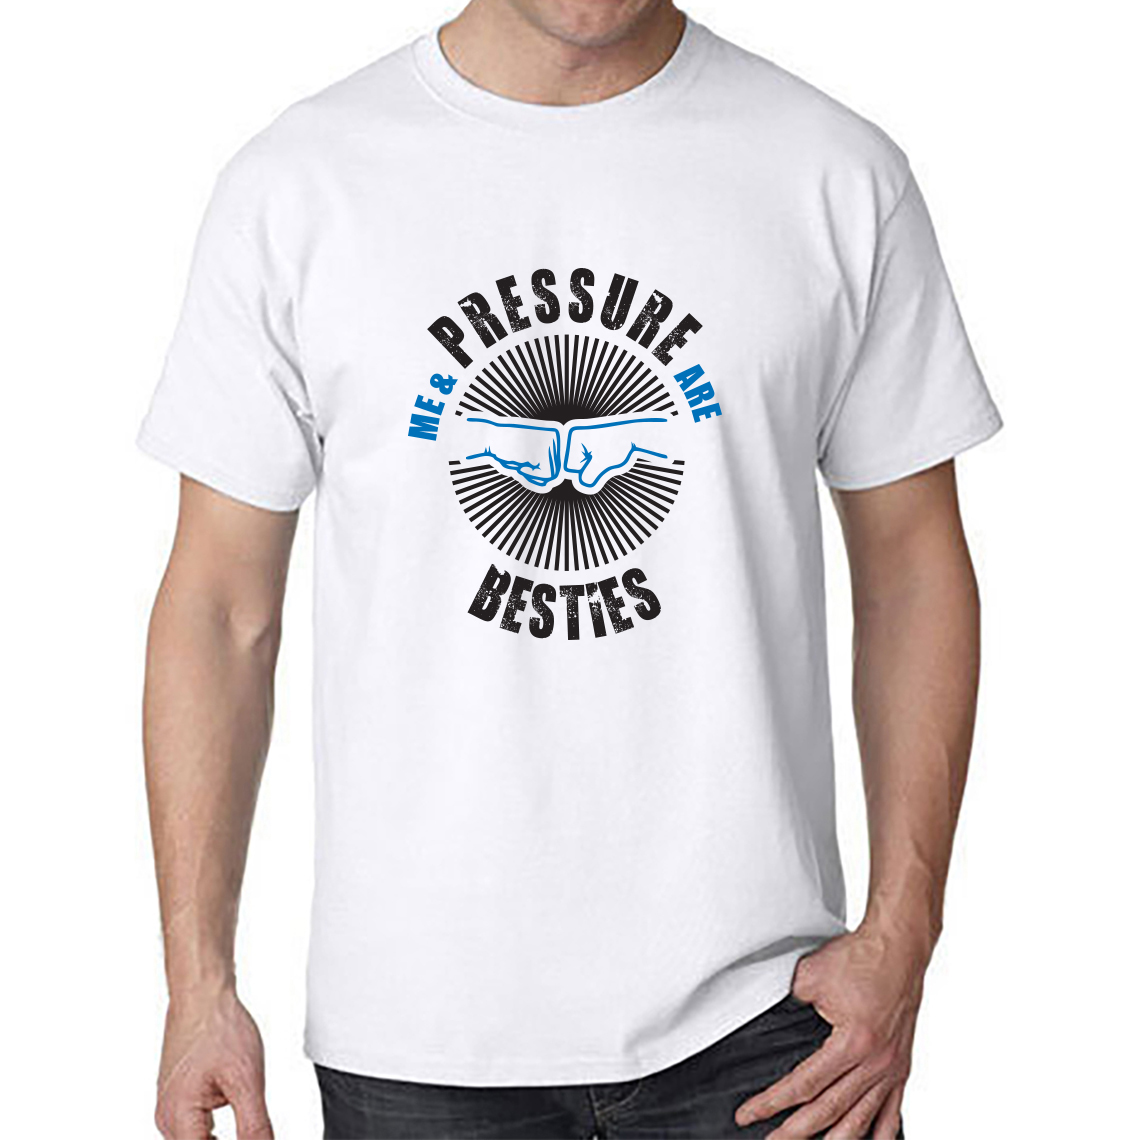 t shirt design for me and pressure are the besties